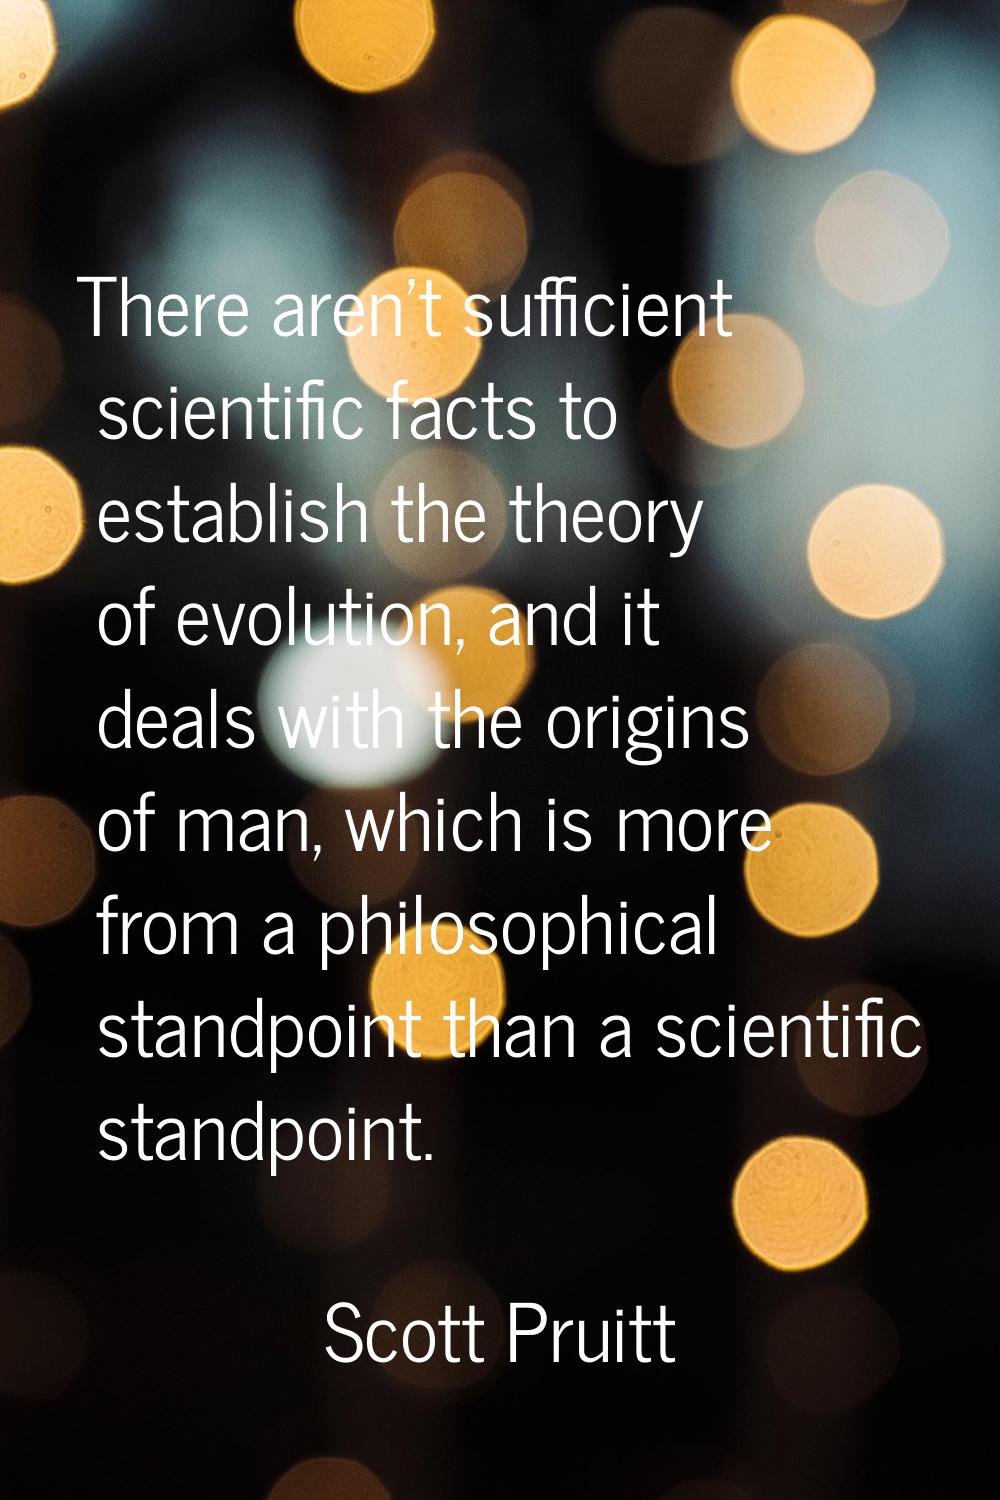 There aren't sufficient scientific facts to establish the theory of evolution, and it deals with th